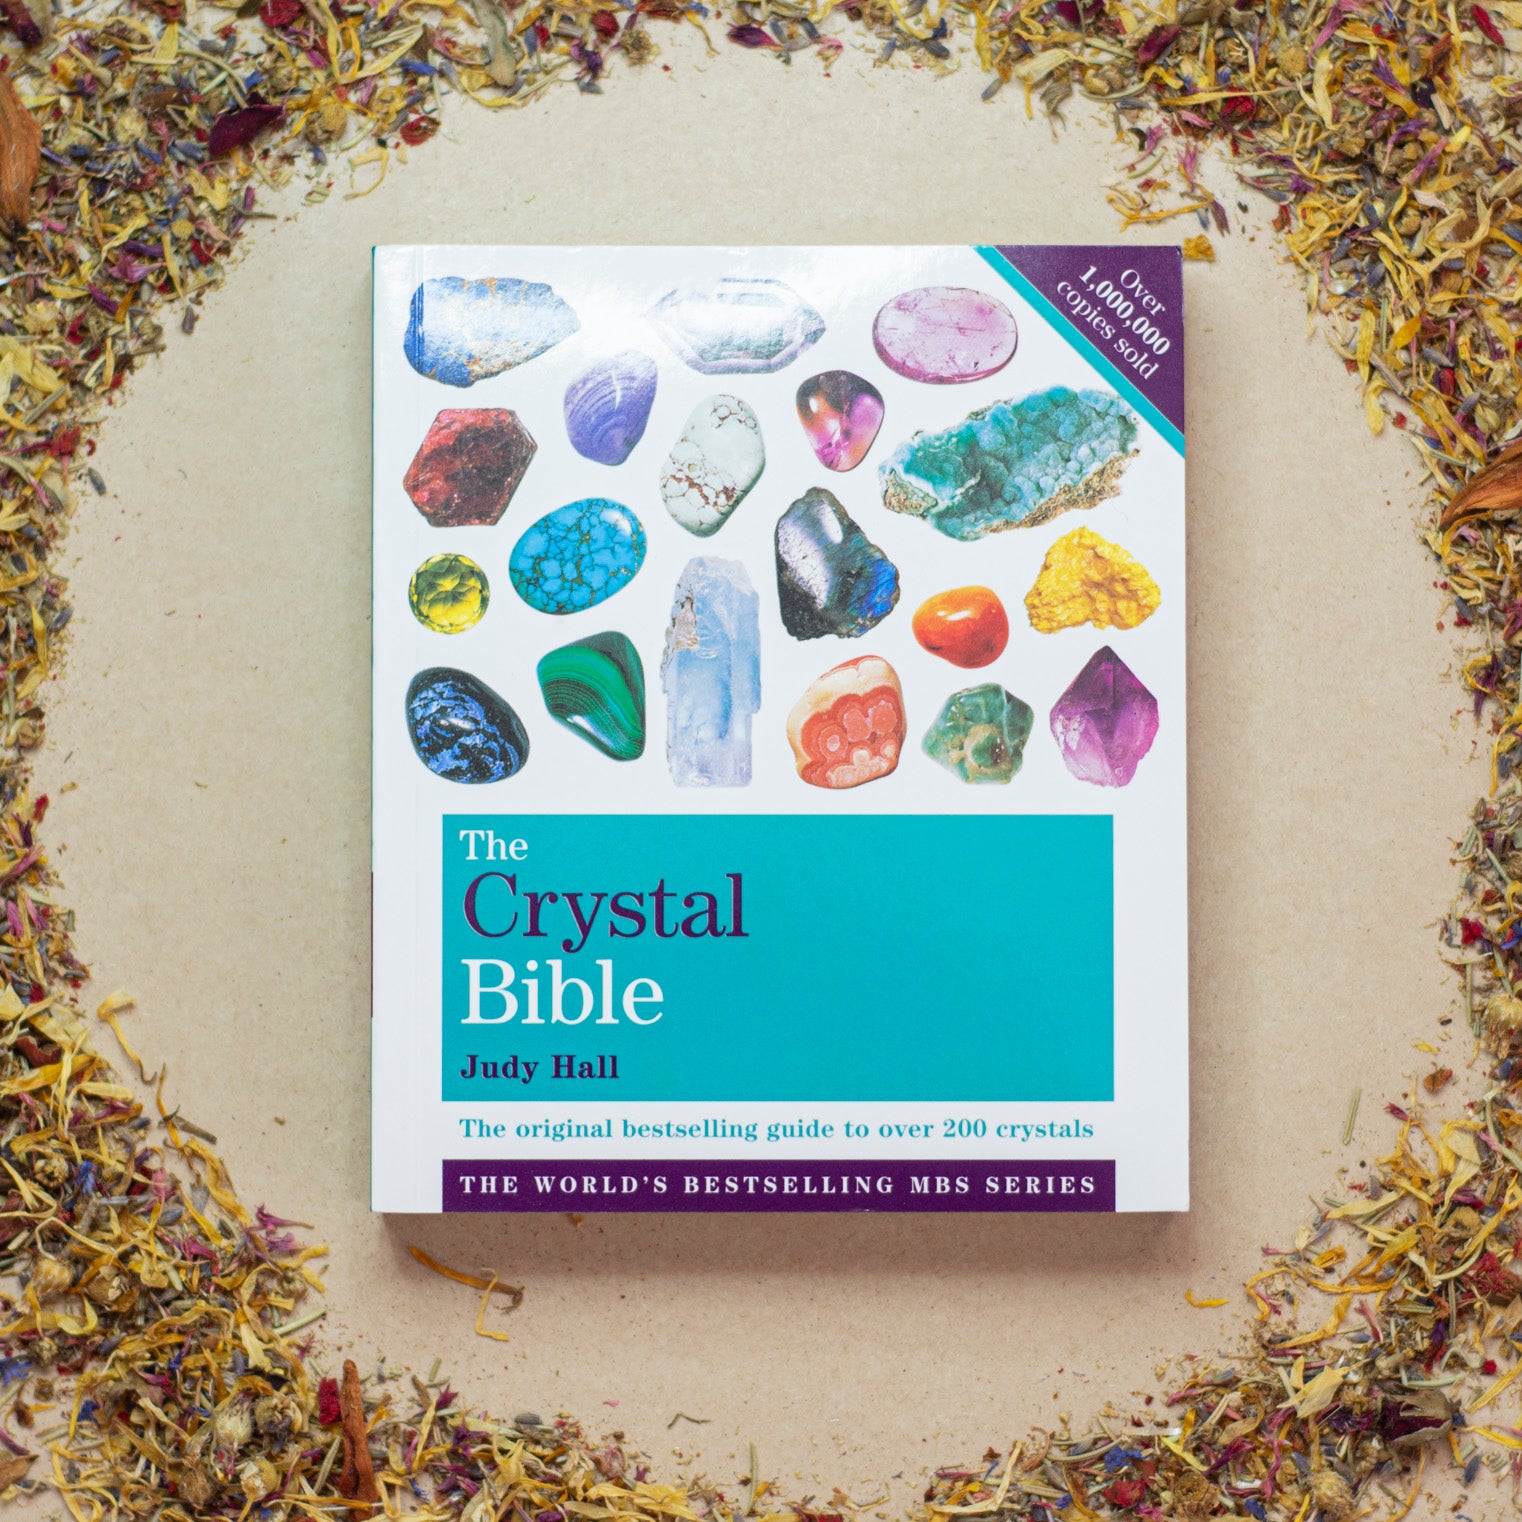 The Crystal Bible Vol 1 By Judy Hall